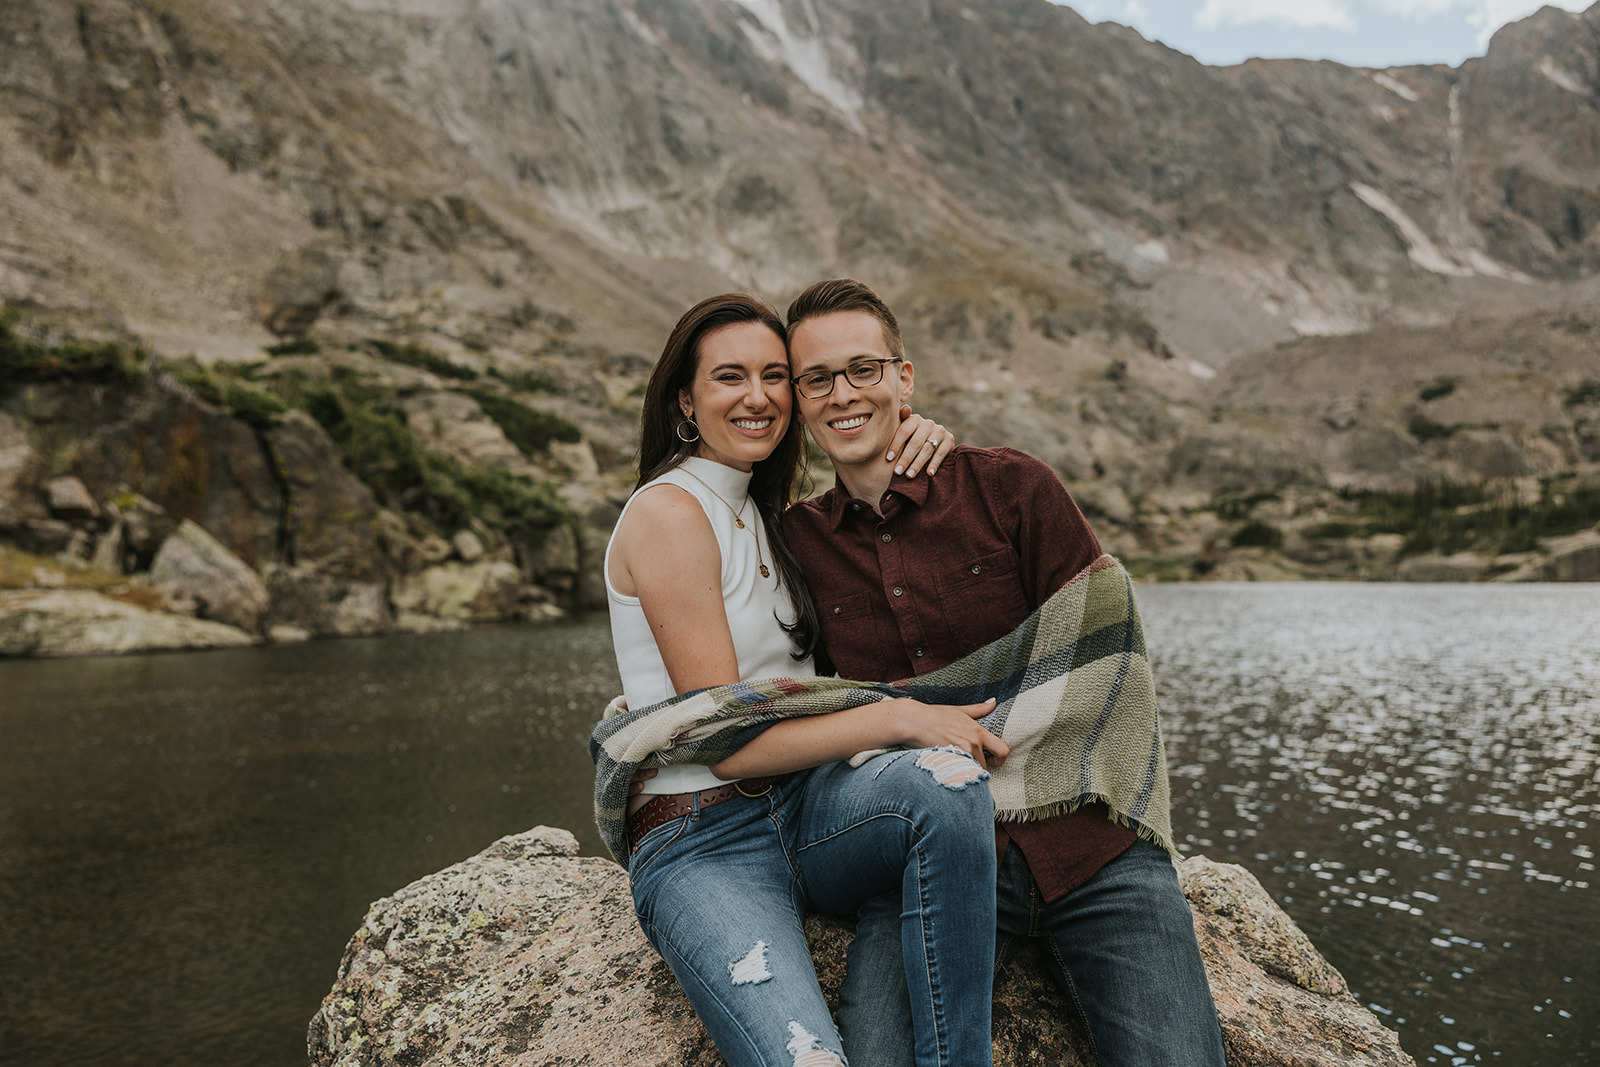 couples engagement photos in the outdoors with waterfalls and beautiful views